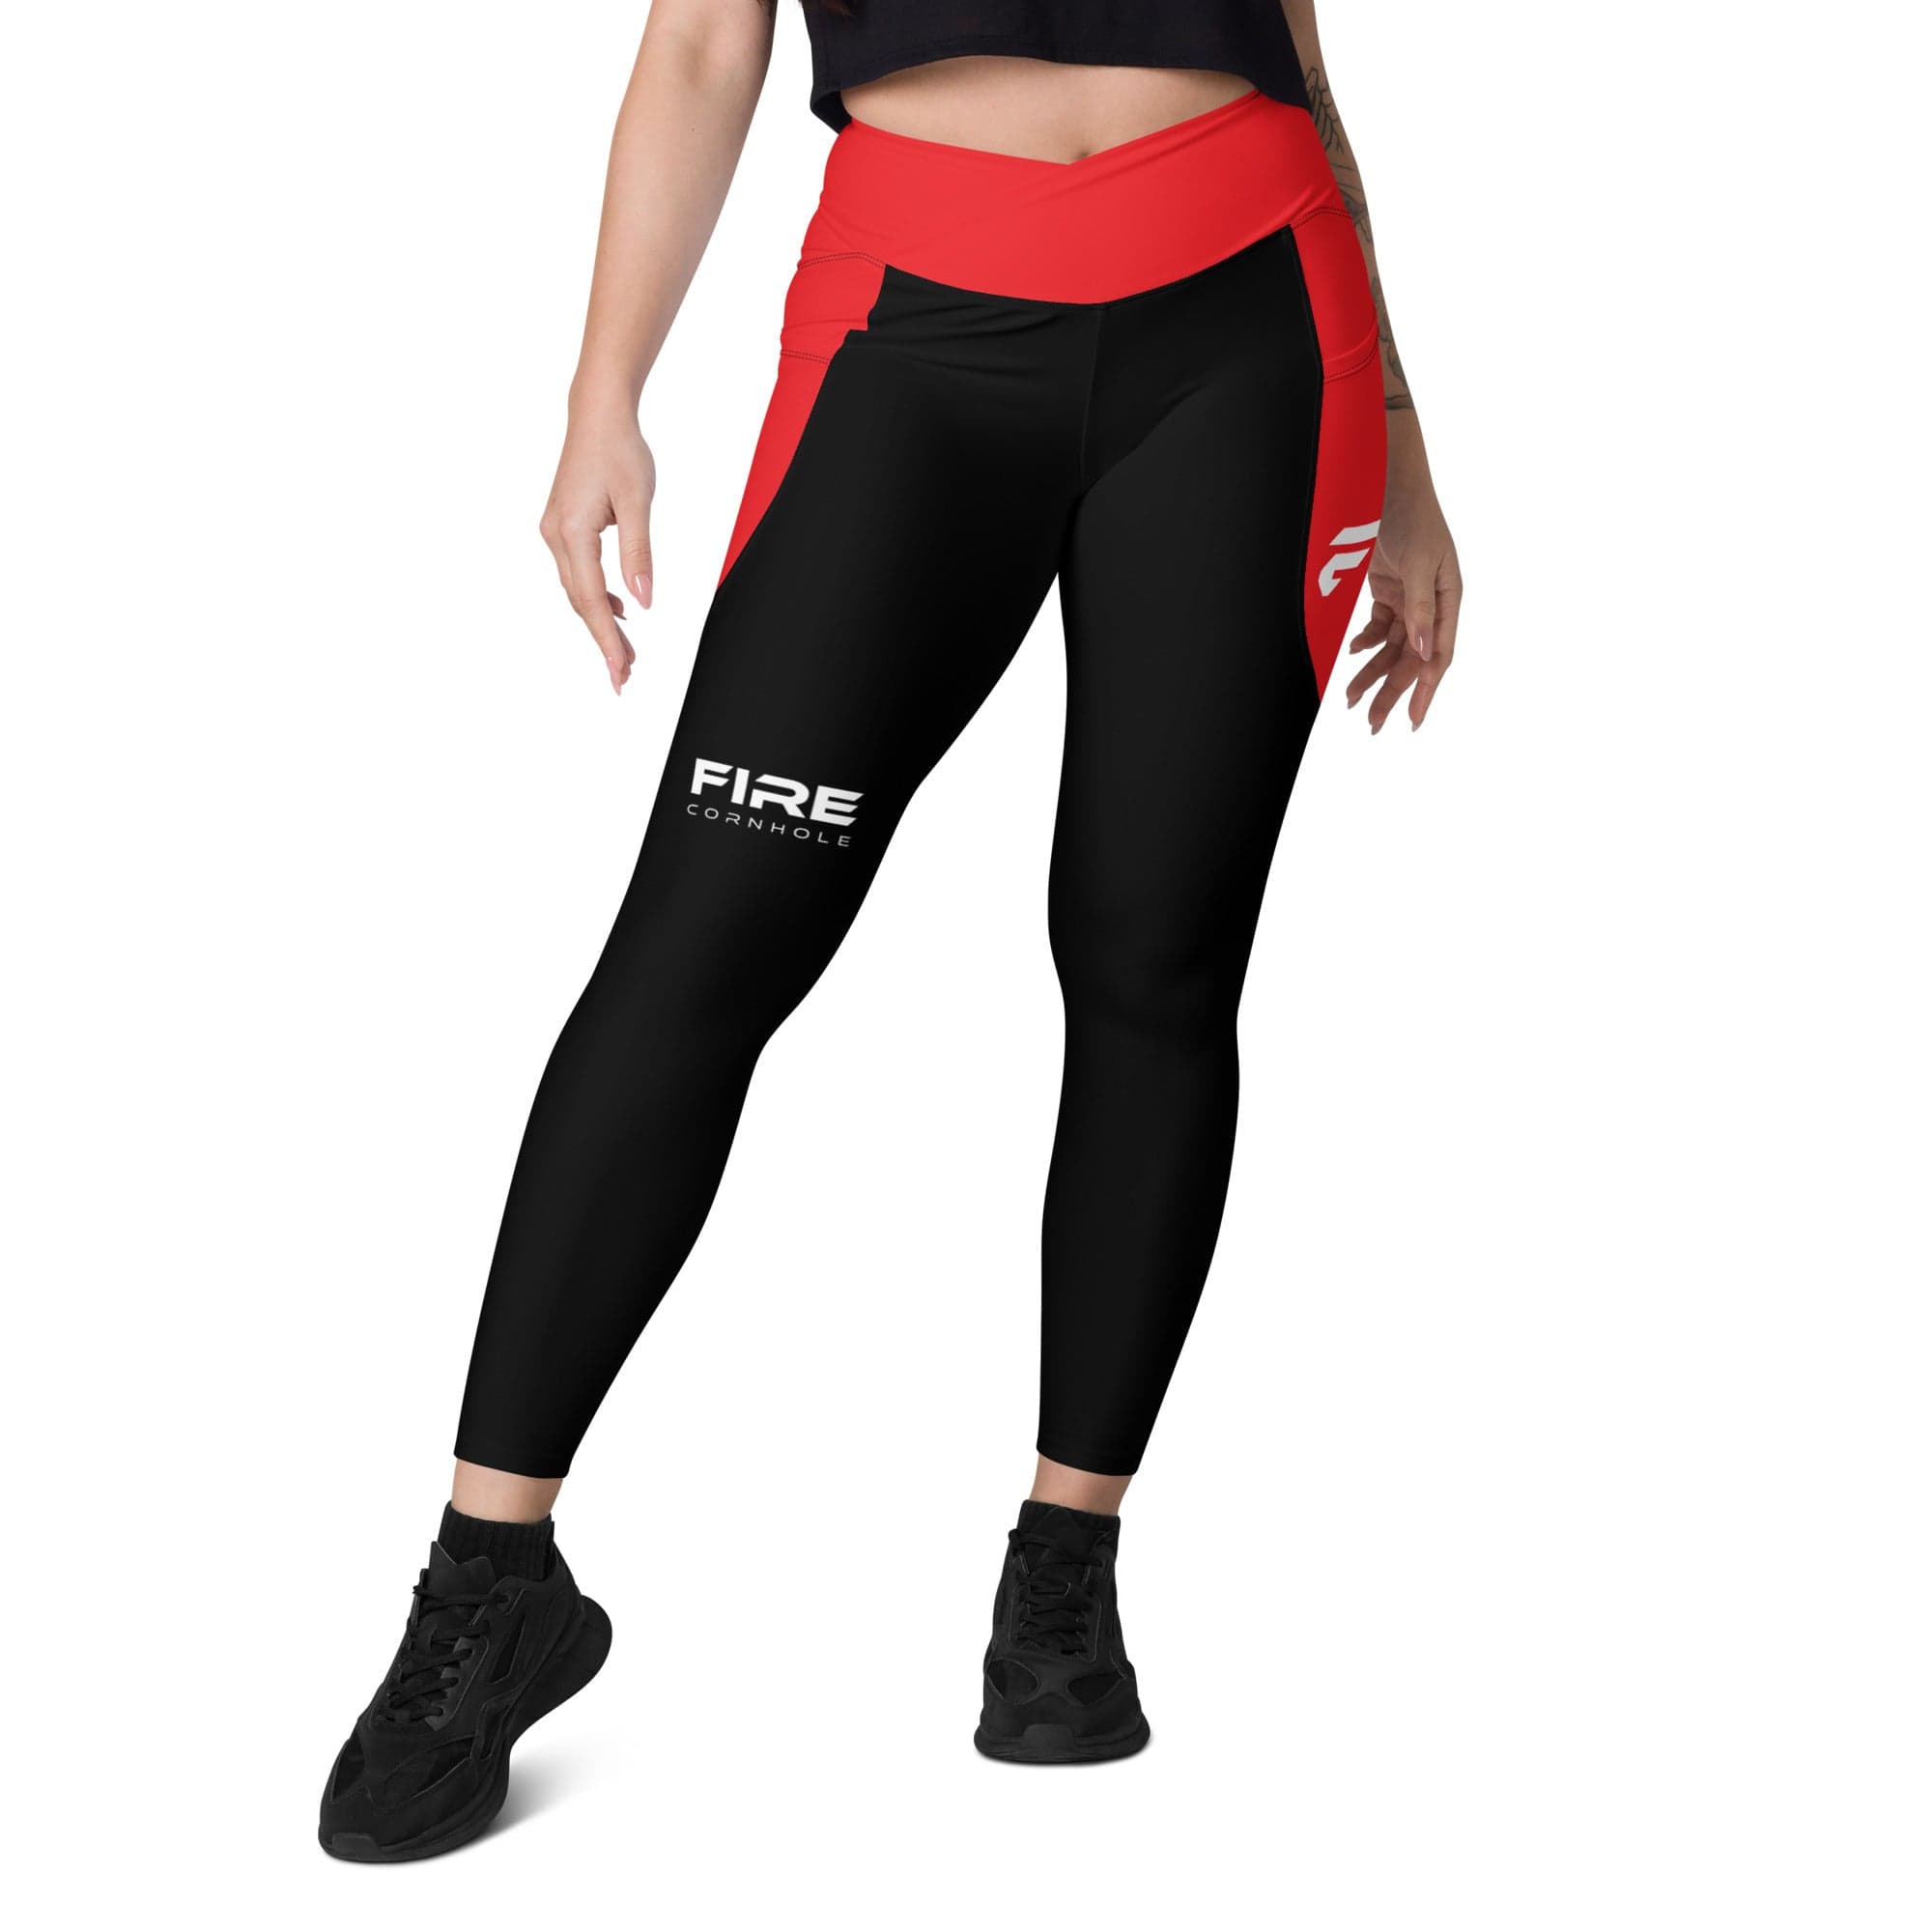 Fire Cornhole Crossover leggings with pockets in black and red